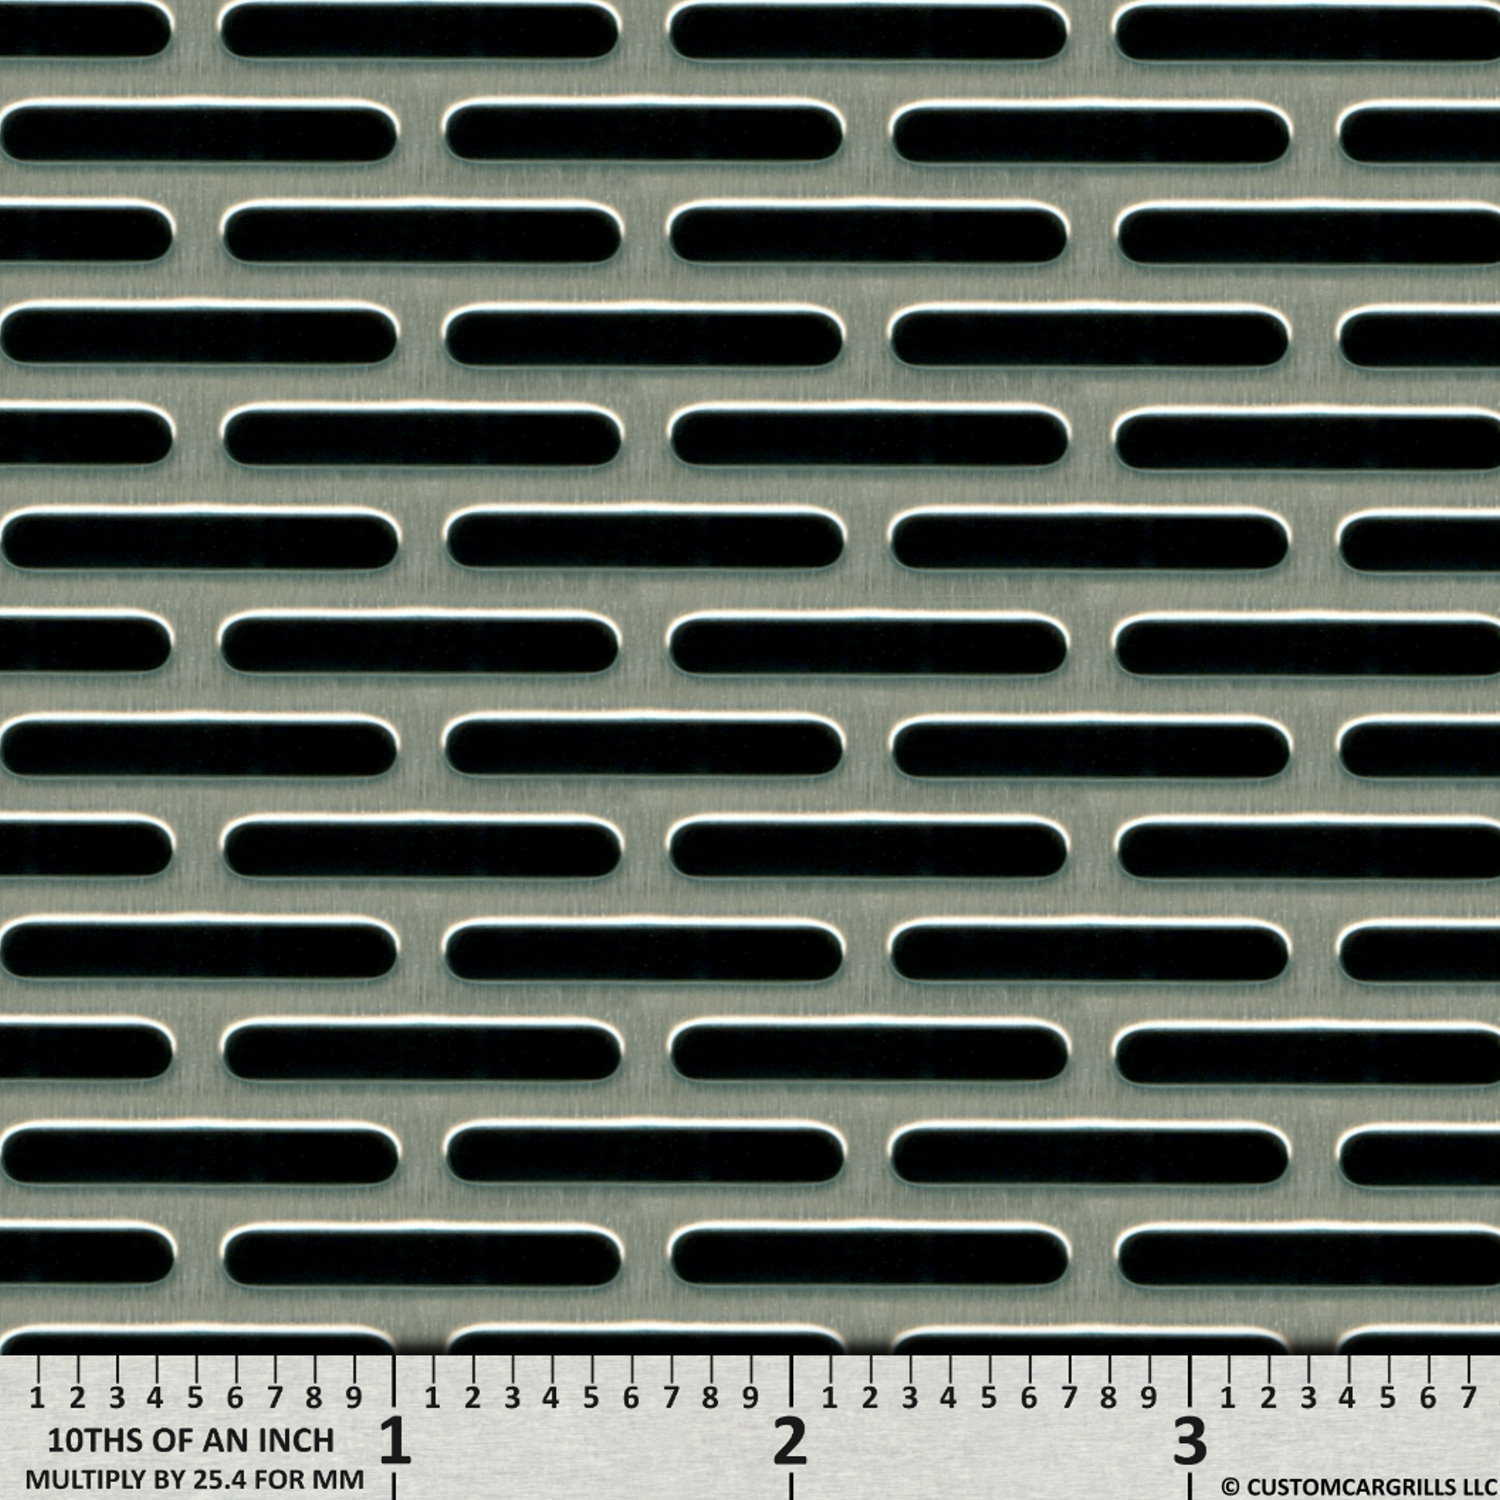 16in. x 48in. Perforated SS Grill Mesh Sheet - Silver